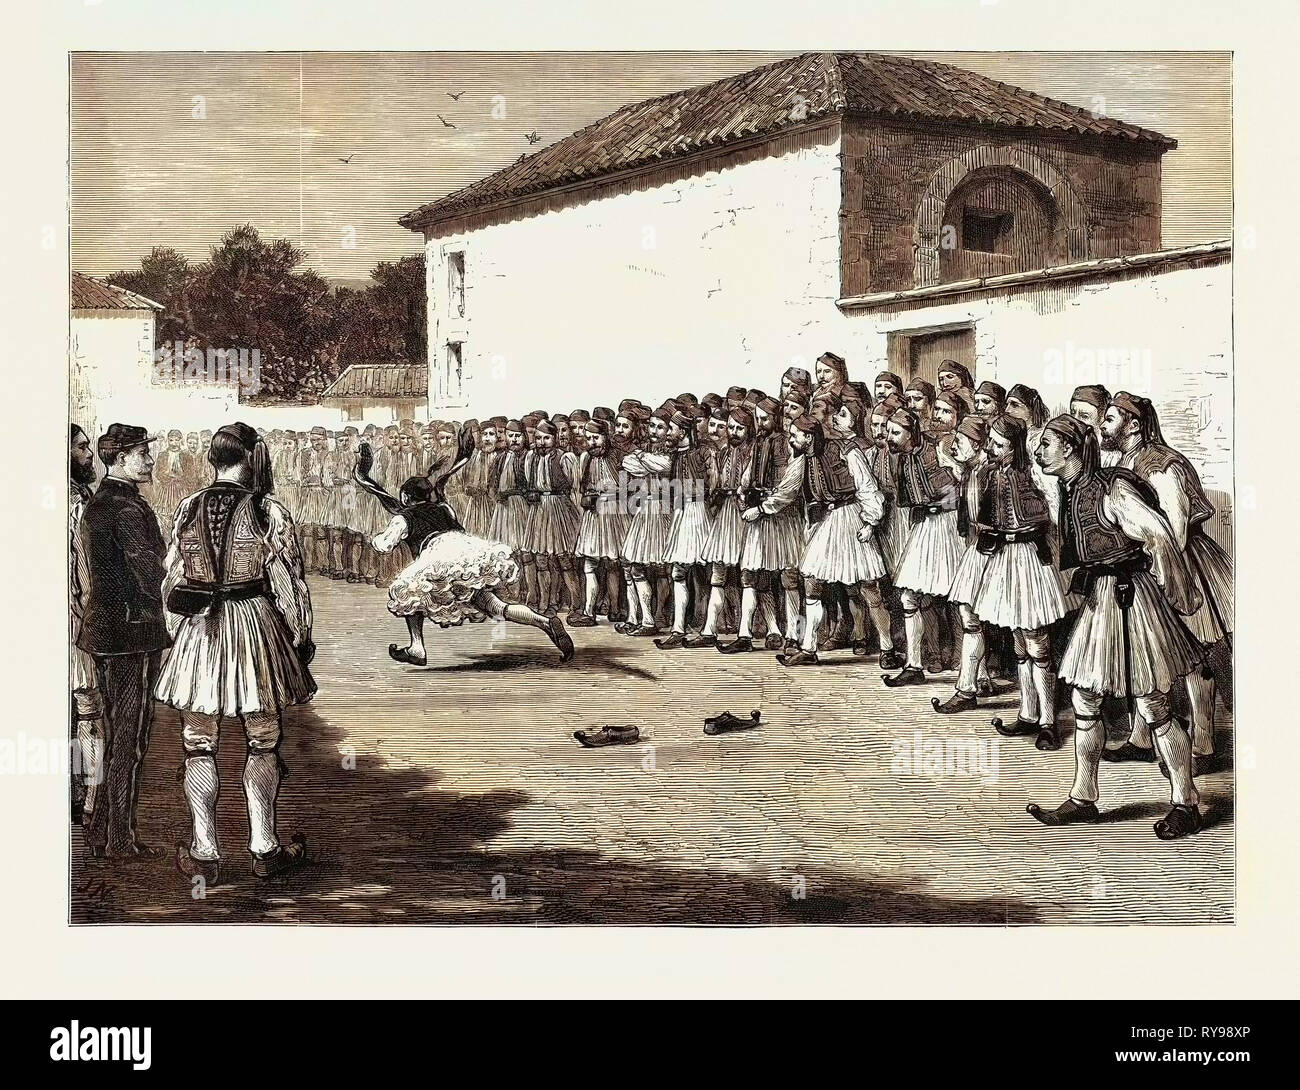 Our Artist with the Greeks: Sports in the Barracks, Athens, Greece Stock Photo